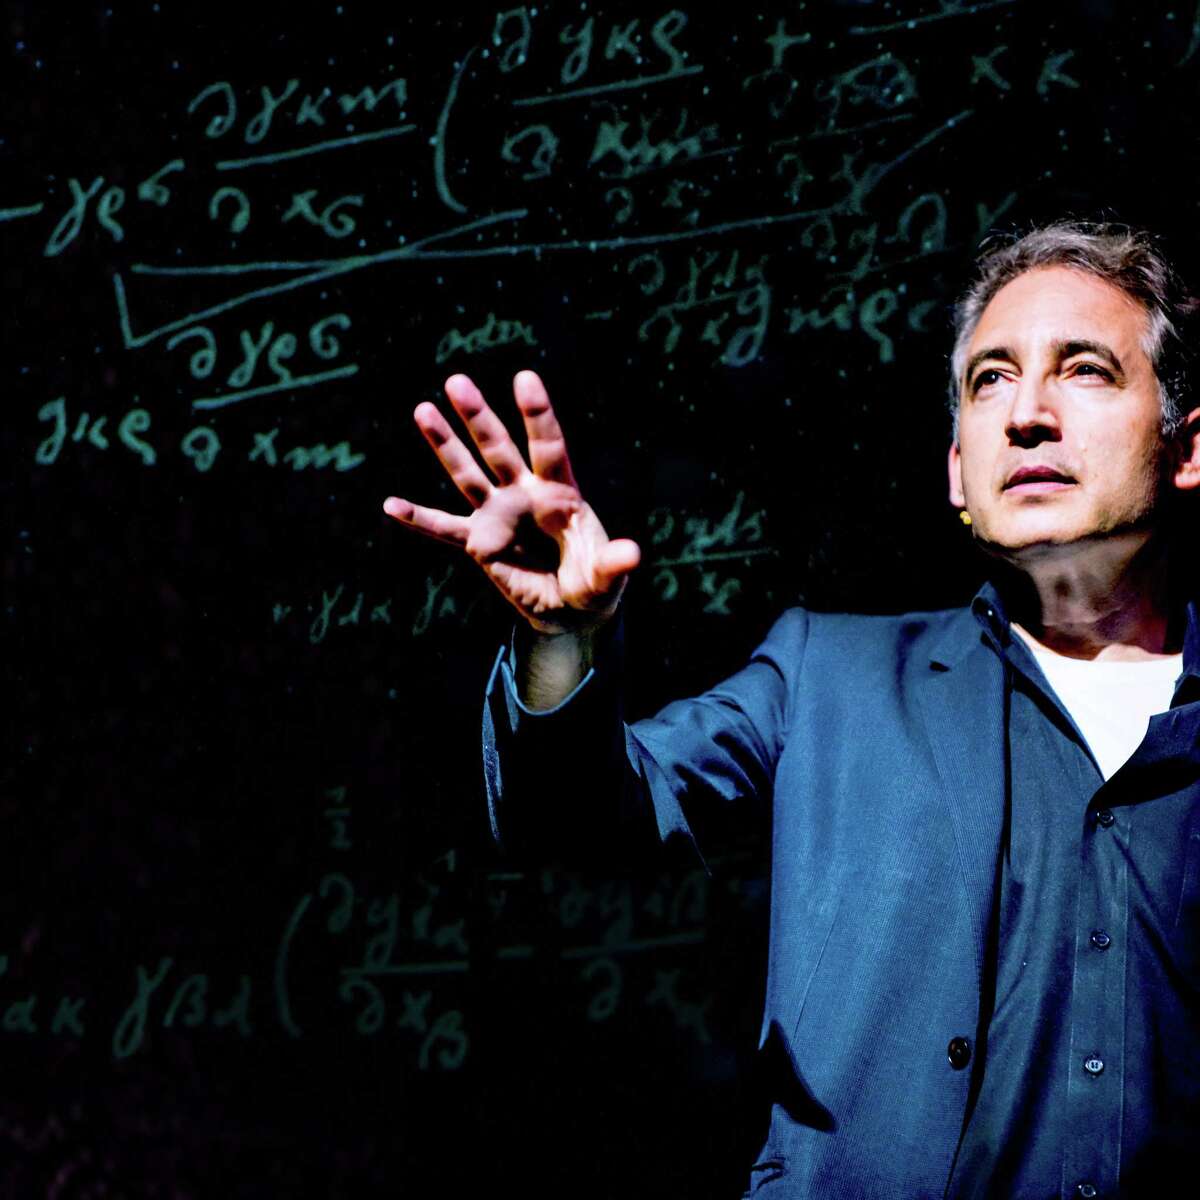 Playwright Brian Greene, a Columbia University physicist, in a scene from his work "Light Falls."